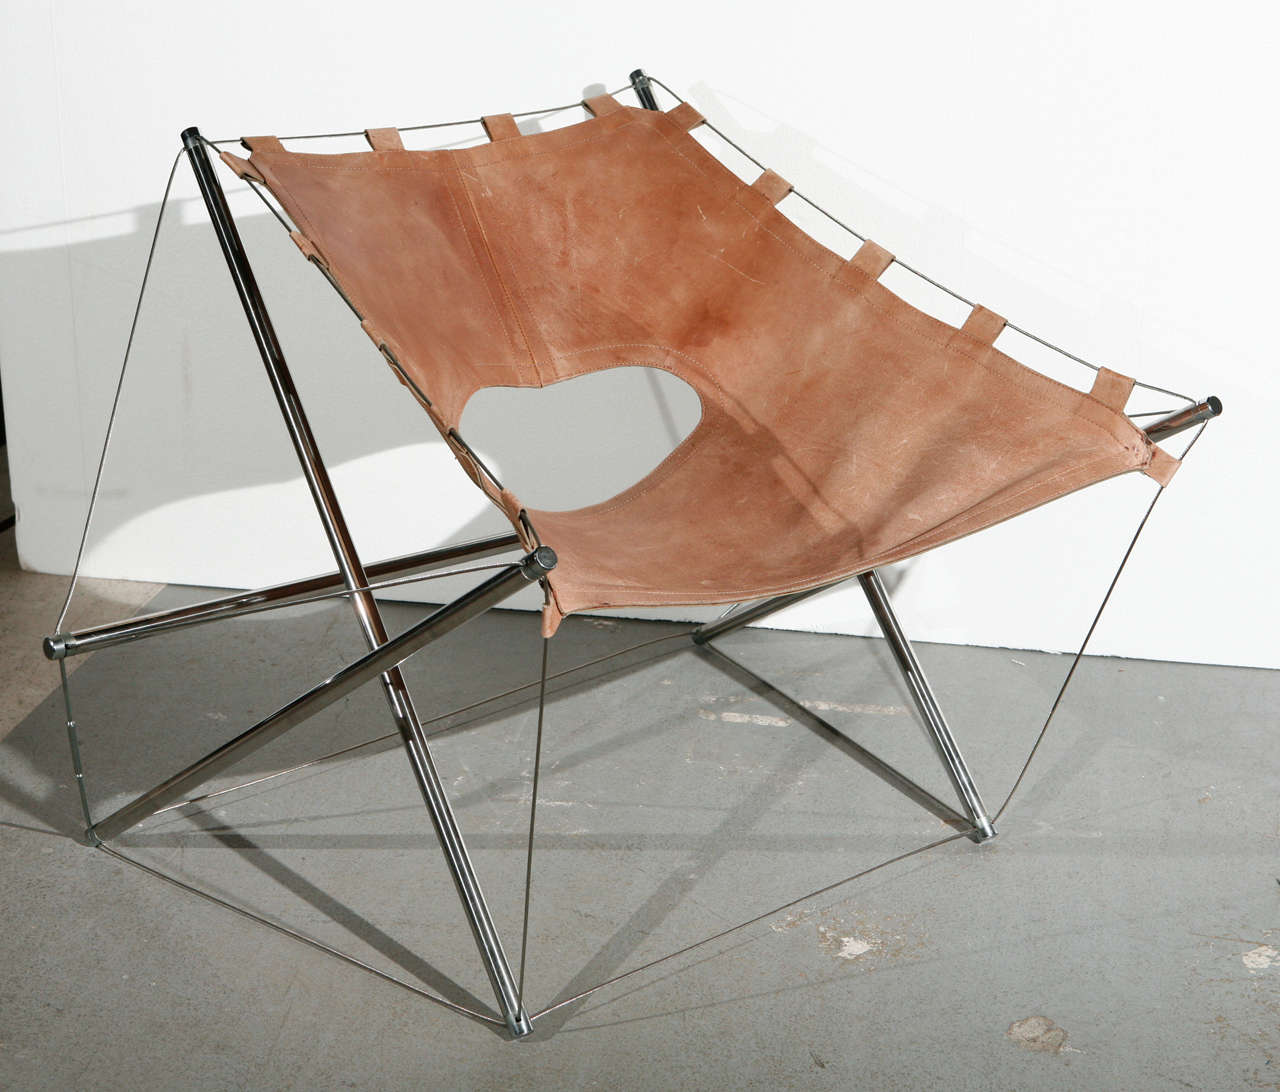 Leather lounge chair with tension wire by J.H. Varichon.